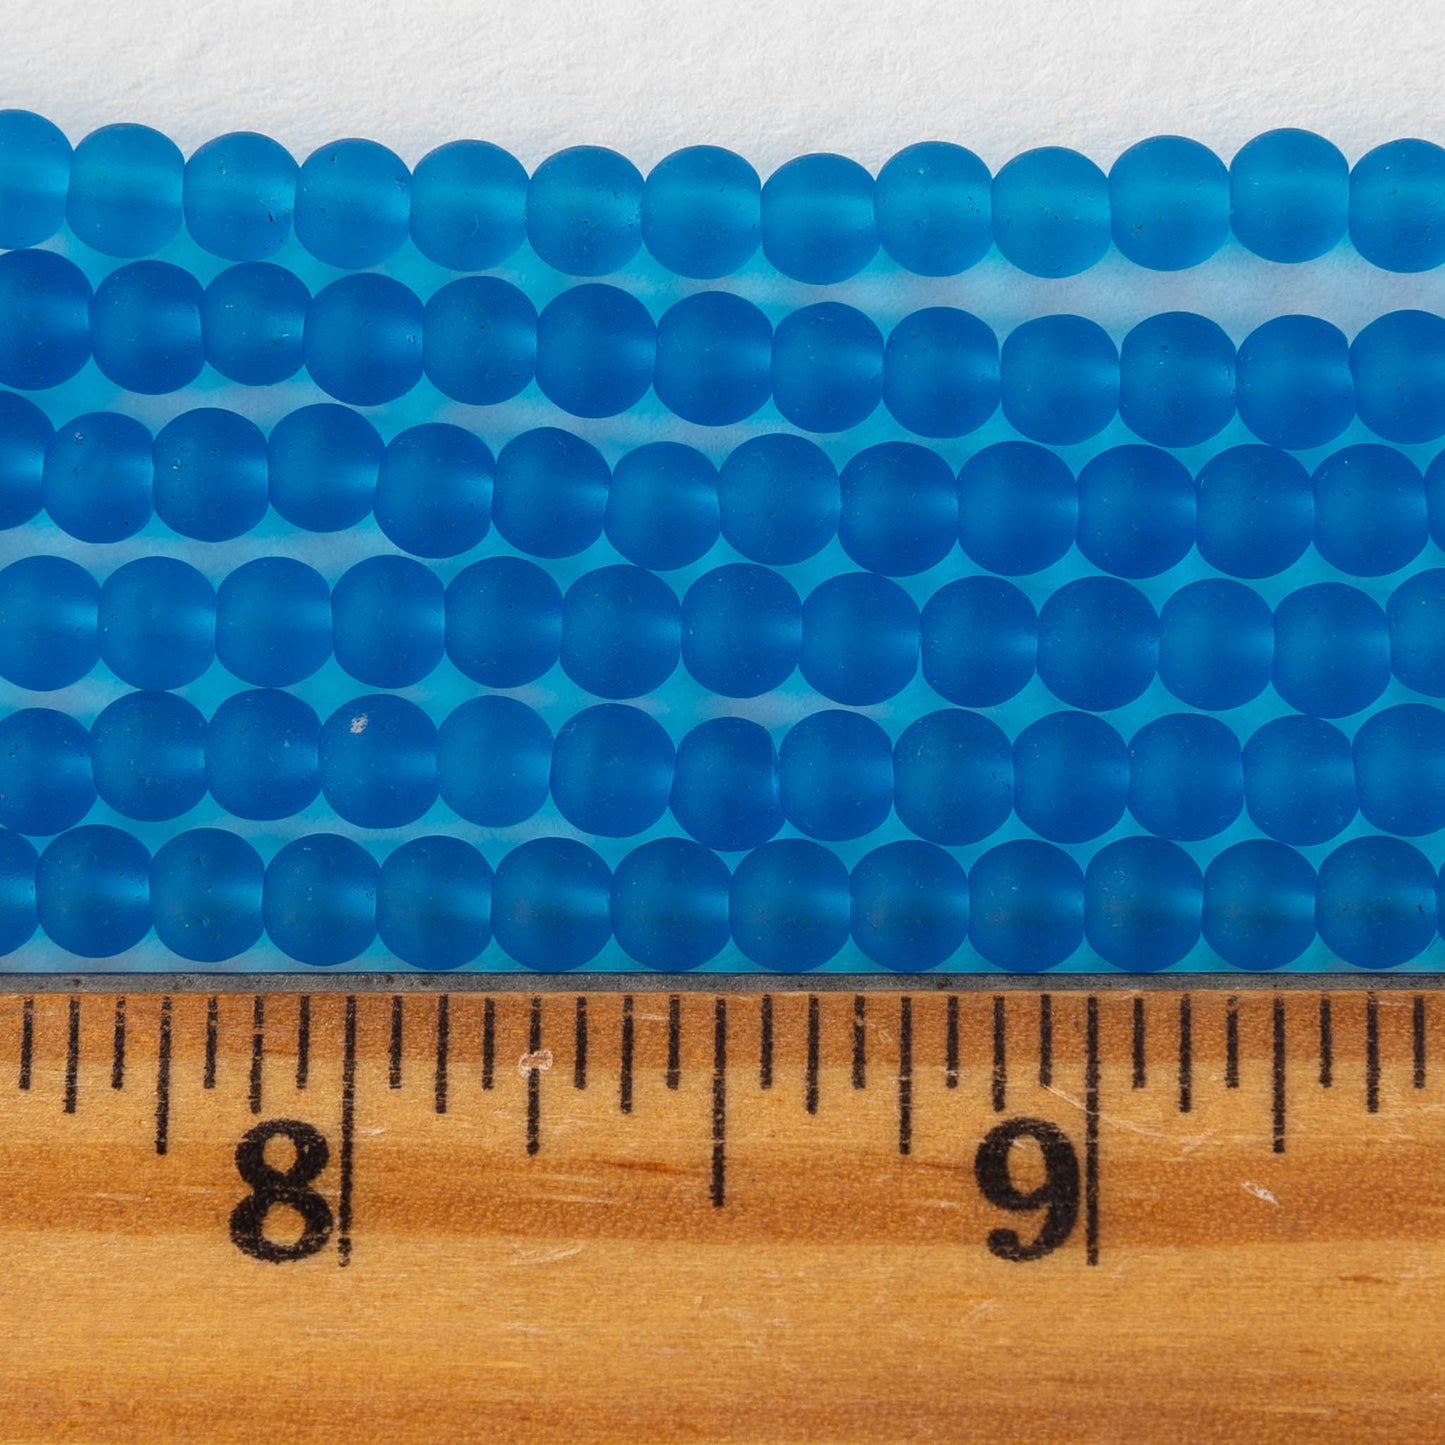 5mm Frosted Glass Rounds - Pacific Blue - 16 Inches